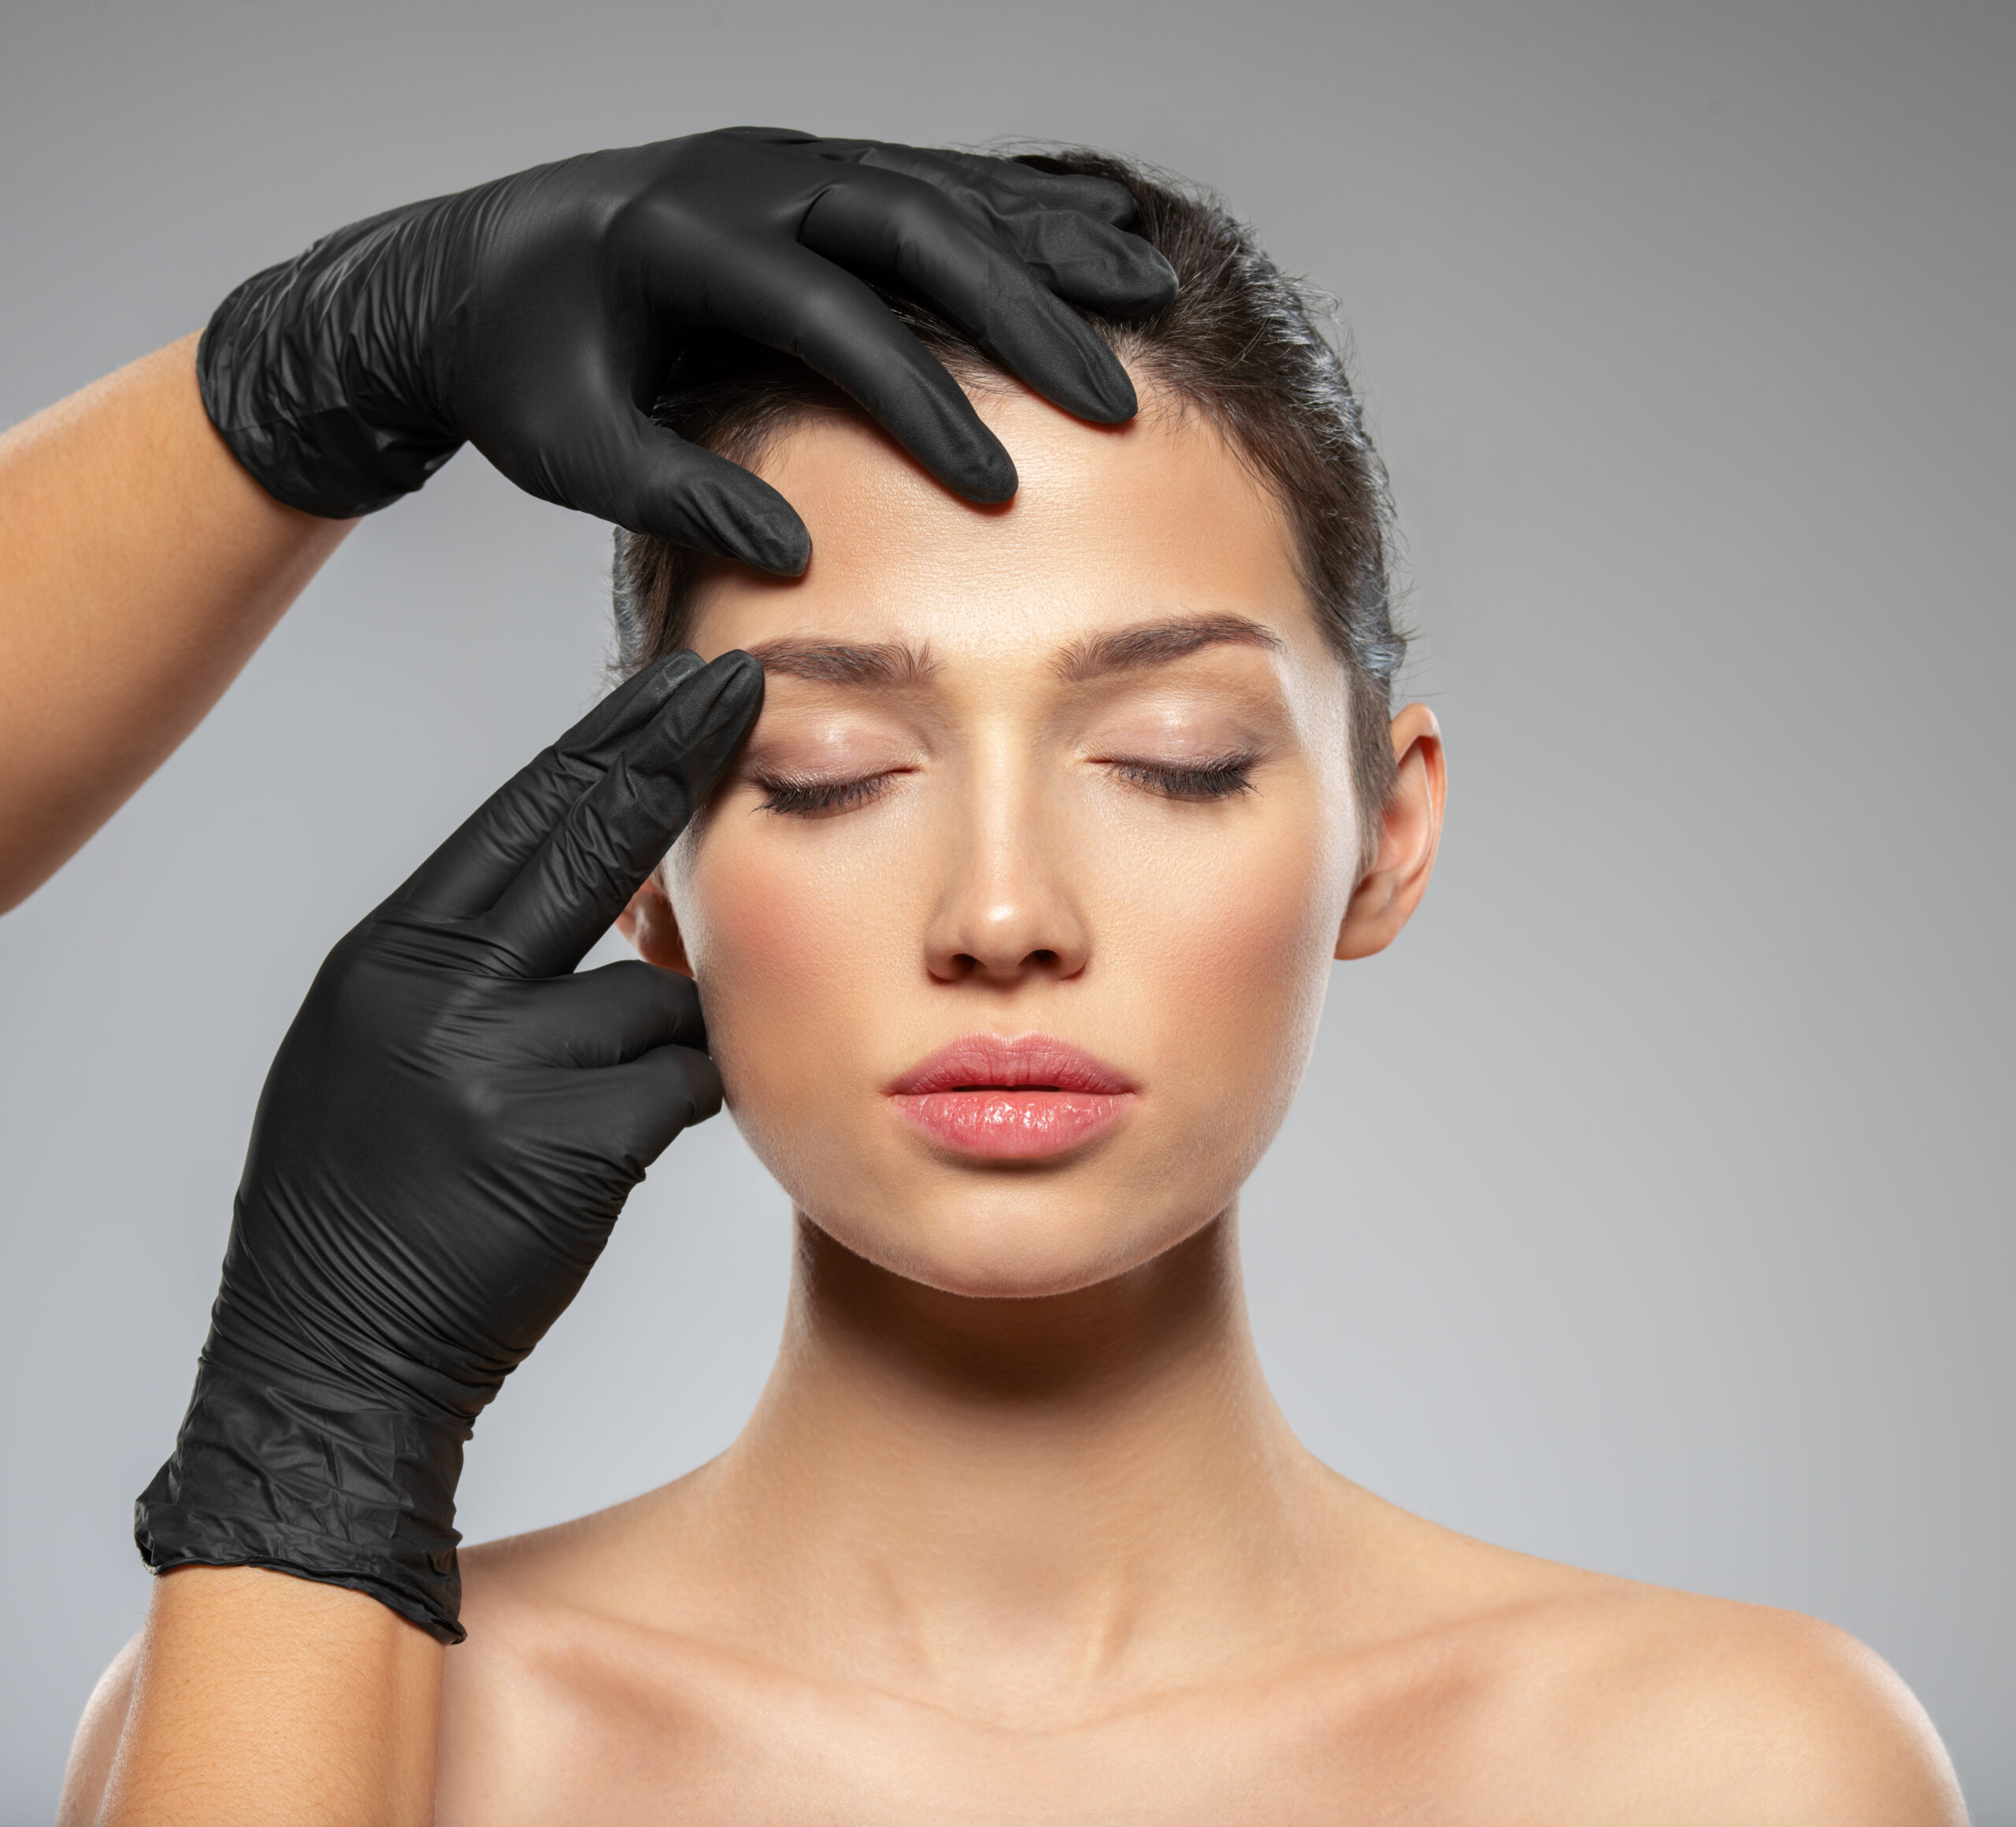 Face skin check before plastic surgery. Beautician touching woman face. Doctor checks a skin before plastic surgery. Beauty treatments. Plastic surgery doctor is touching face of a patient by hands